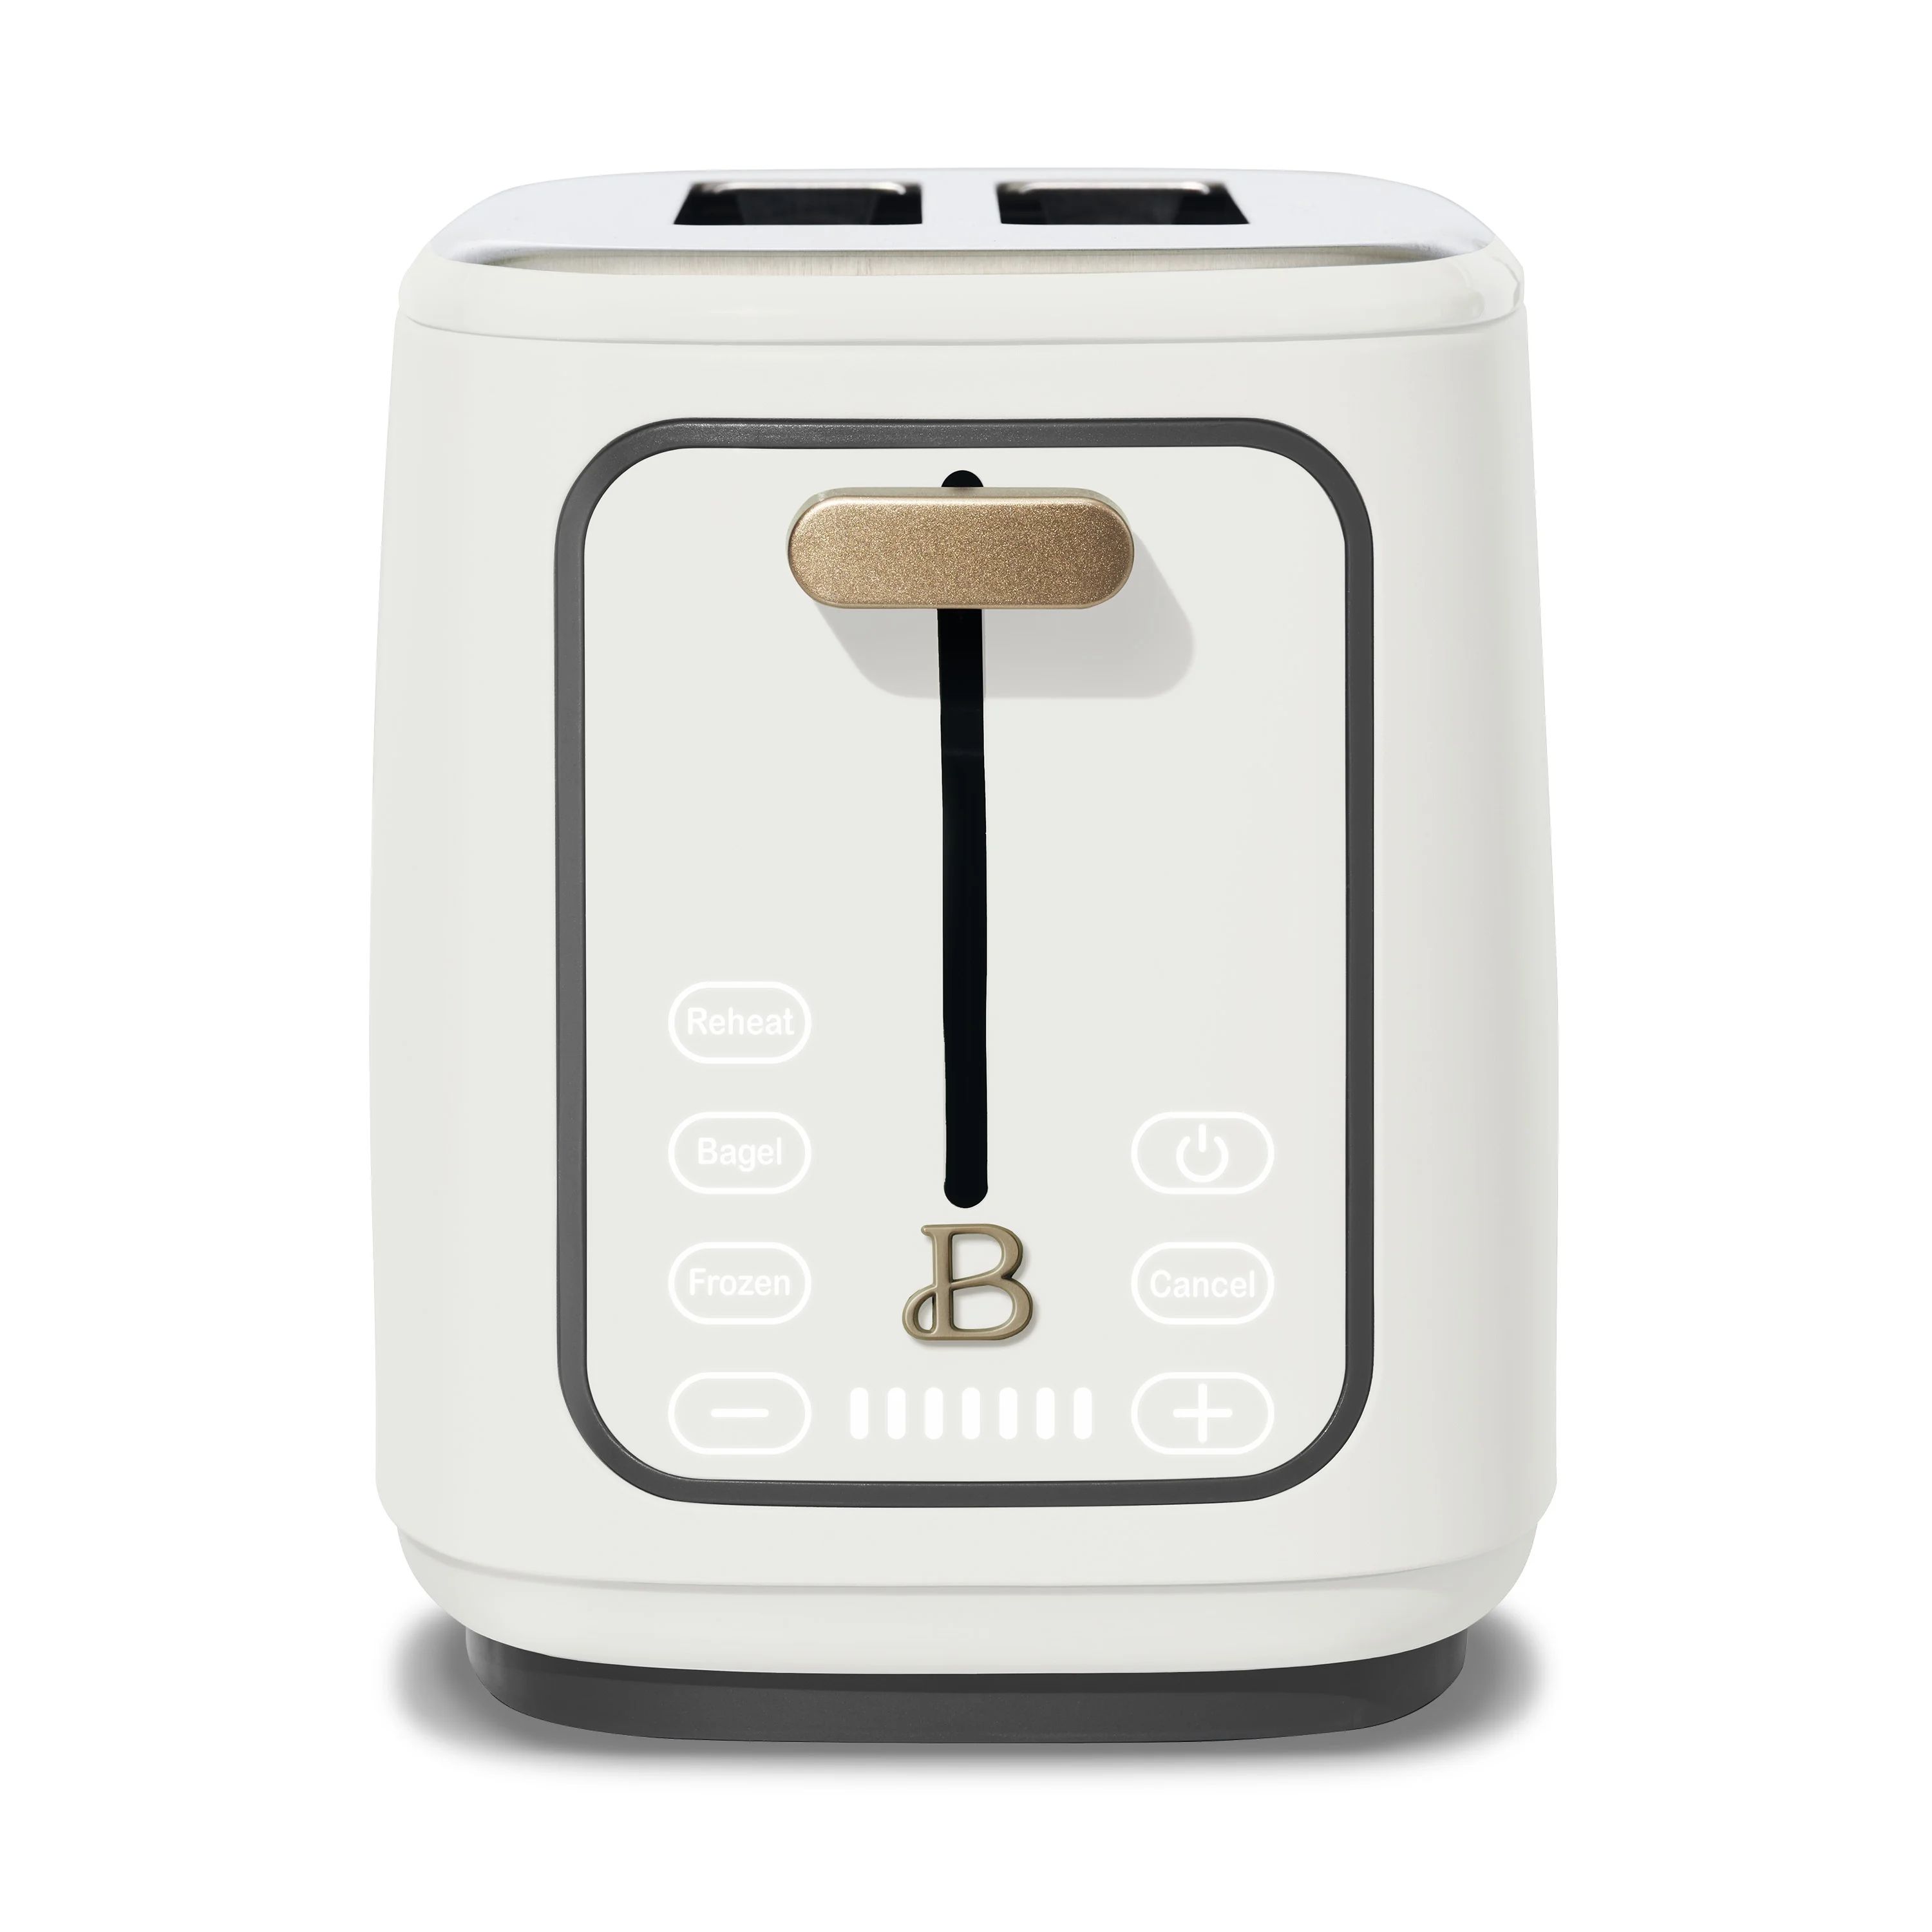 Beautiful 2 Slice Toaster with Touch-Activated Display, White Icing by Drew Barrymore | Walmart (US)